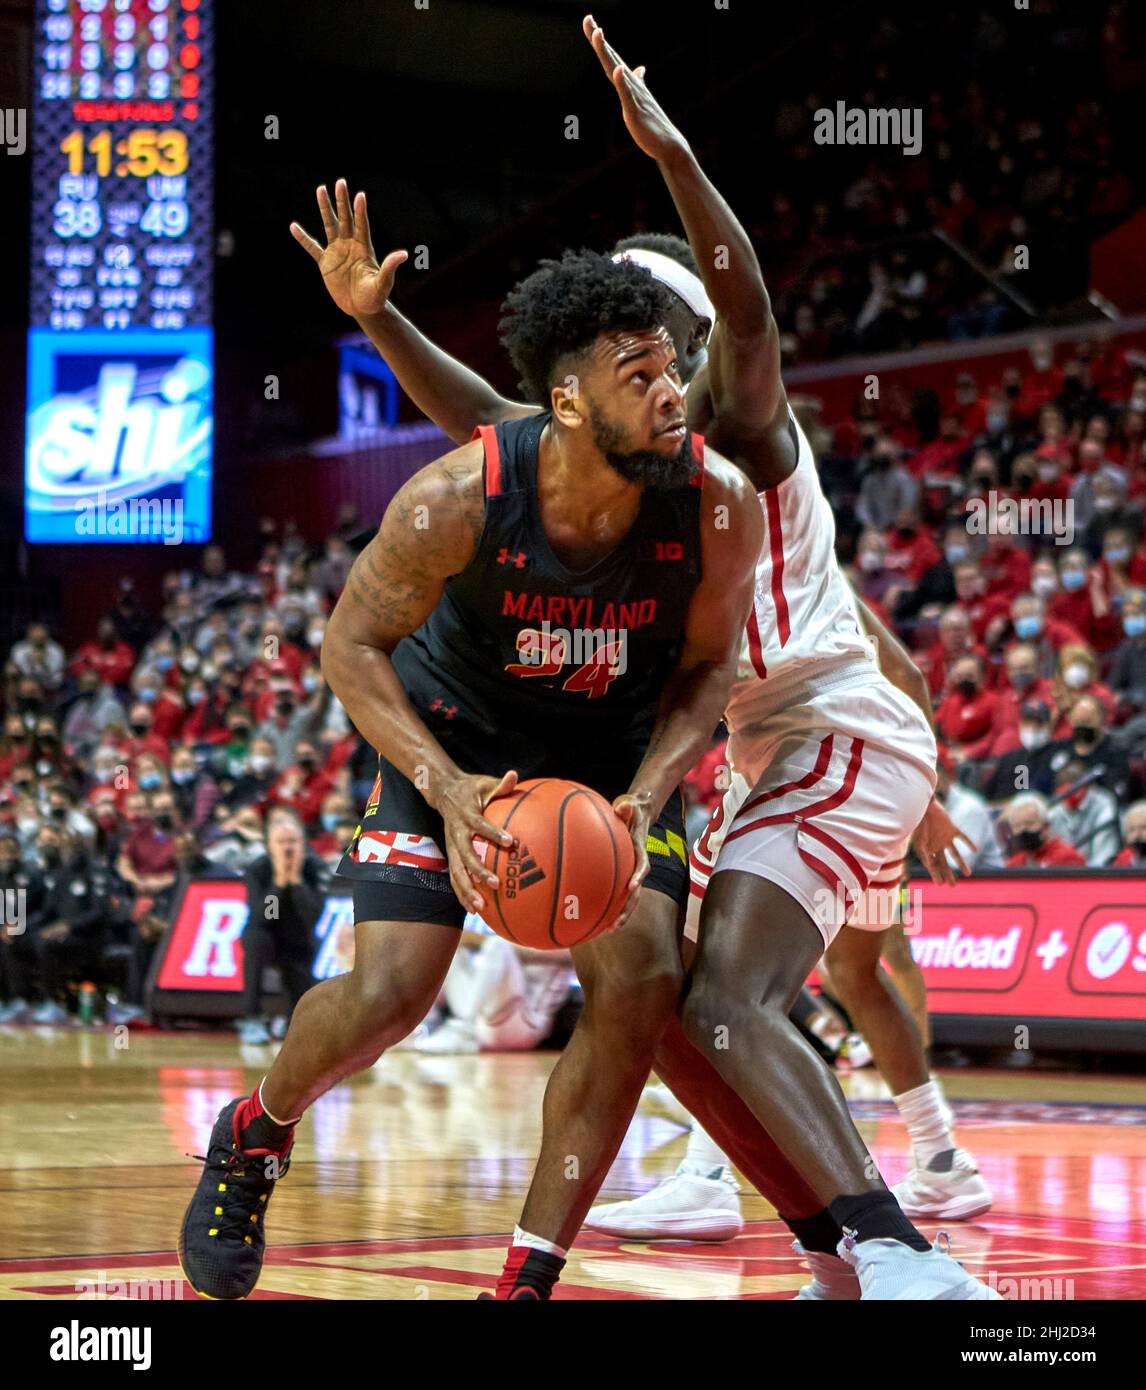 Piscataway, New Jersey, USA. 26th Jan, 2022. Maryland Terrapins forward Donta Scott (24) makes a move to the basket on Rutgers Scarlet Knights forward Mawot Mag (3) in the second half during NCAA basketball action at Jersey Mikes Arena in Piscataway, New Jersey. Maryland defeated Rutgers 68-60. Duncan Williams/CSM/Alamy Live News Stock Photo